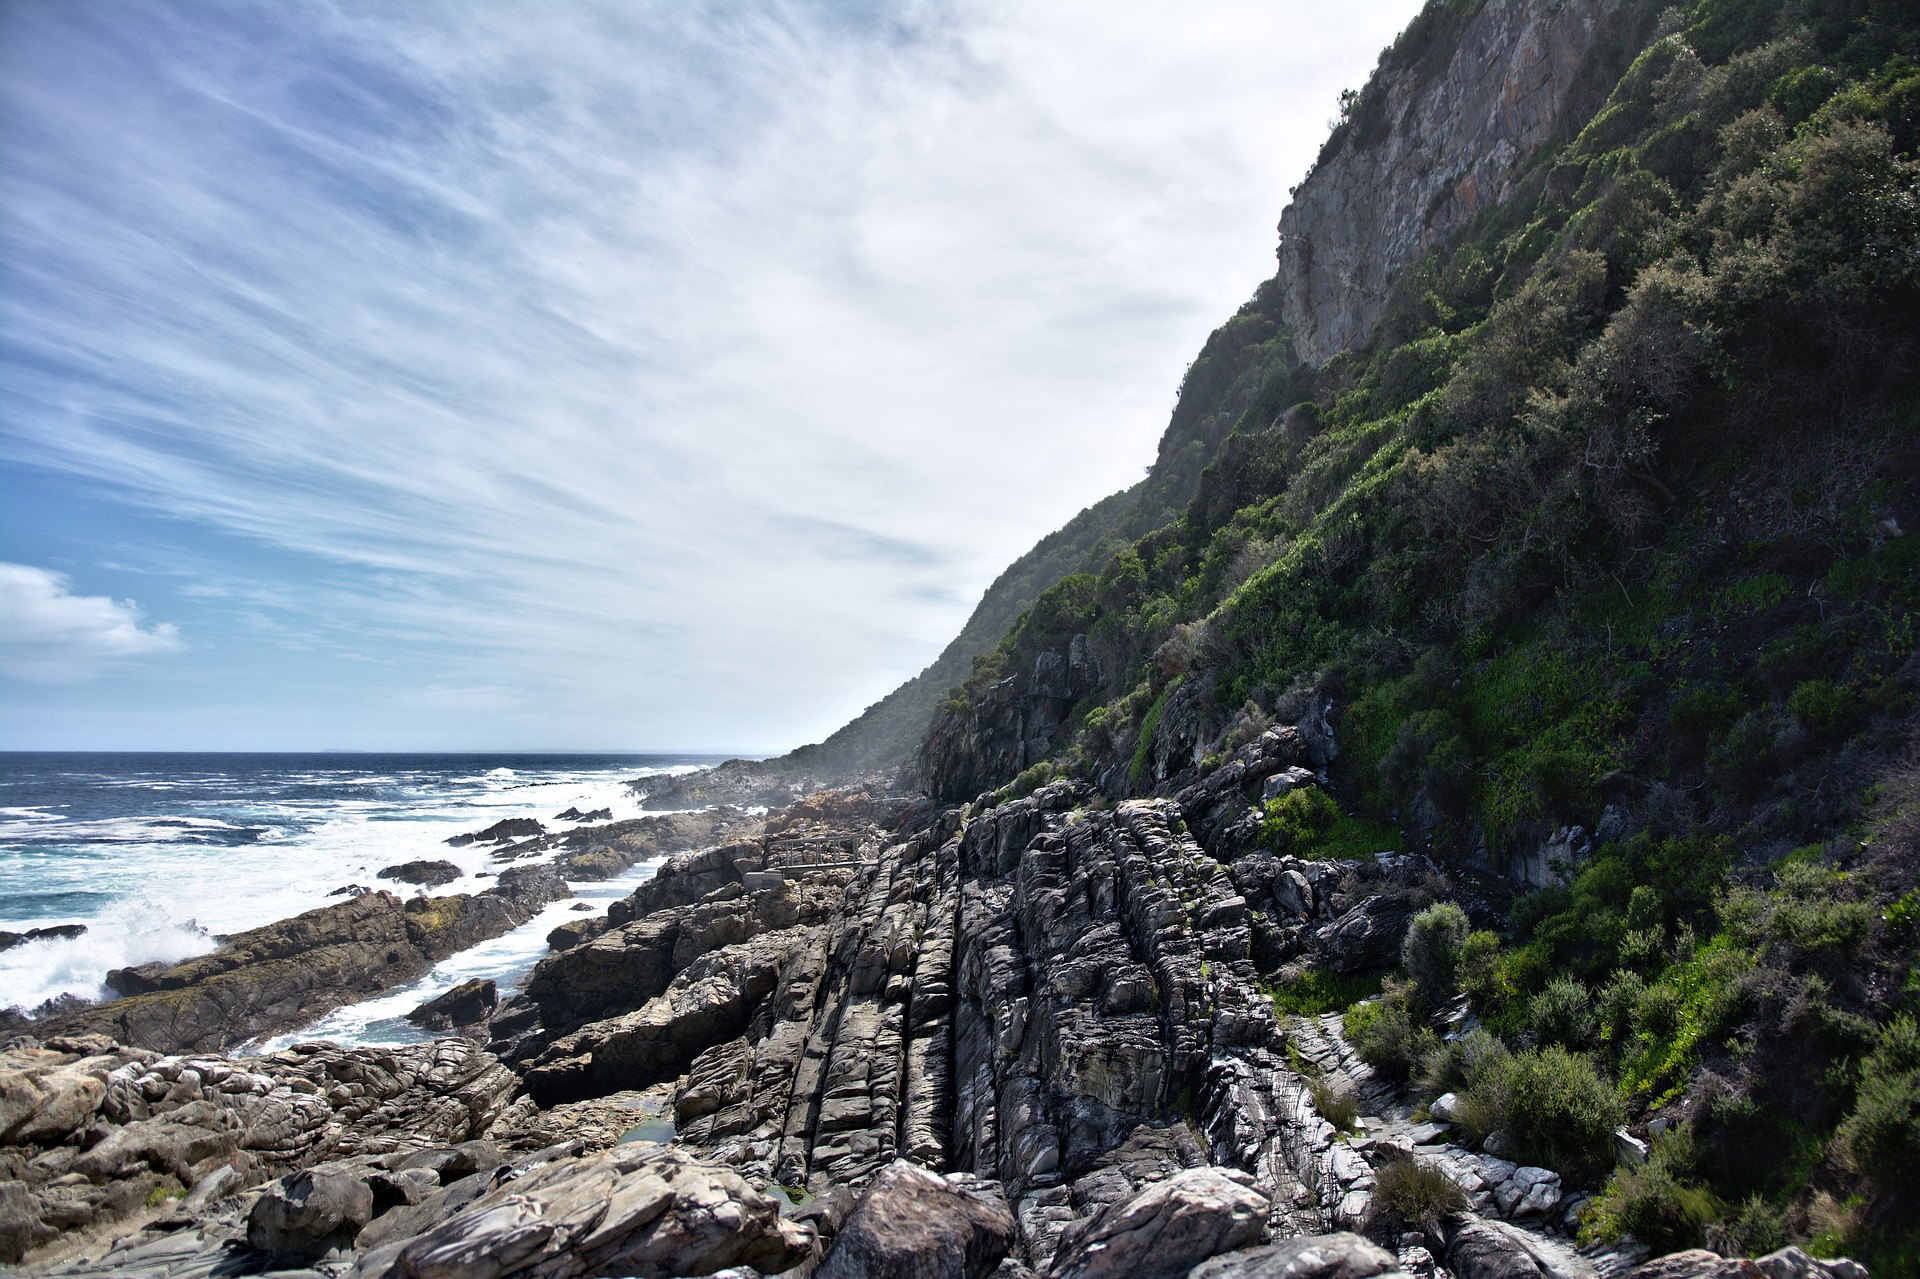 The Otter Trail is one of the best hikes in South Africa (photo: Bertsz)